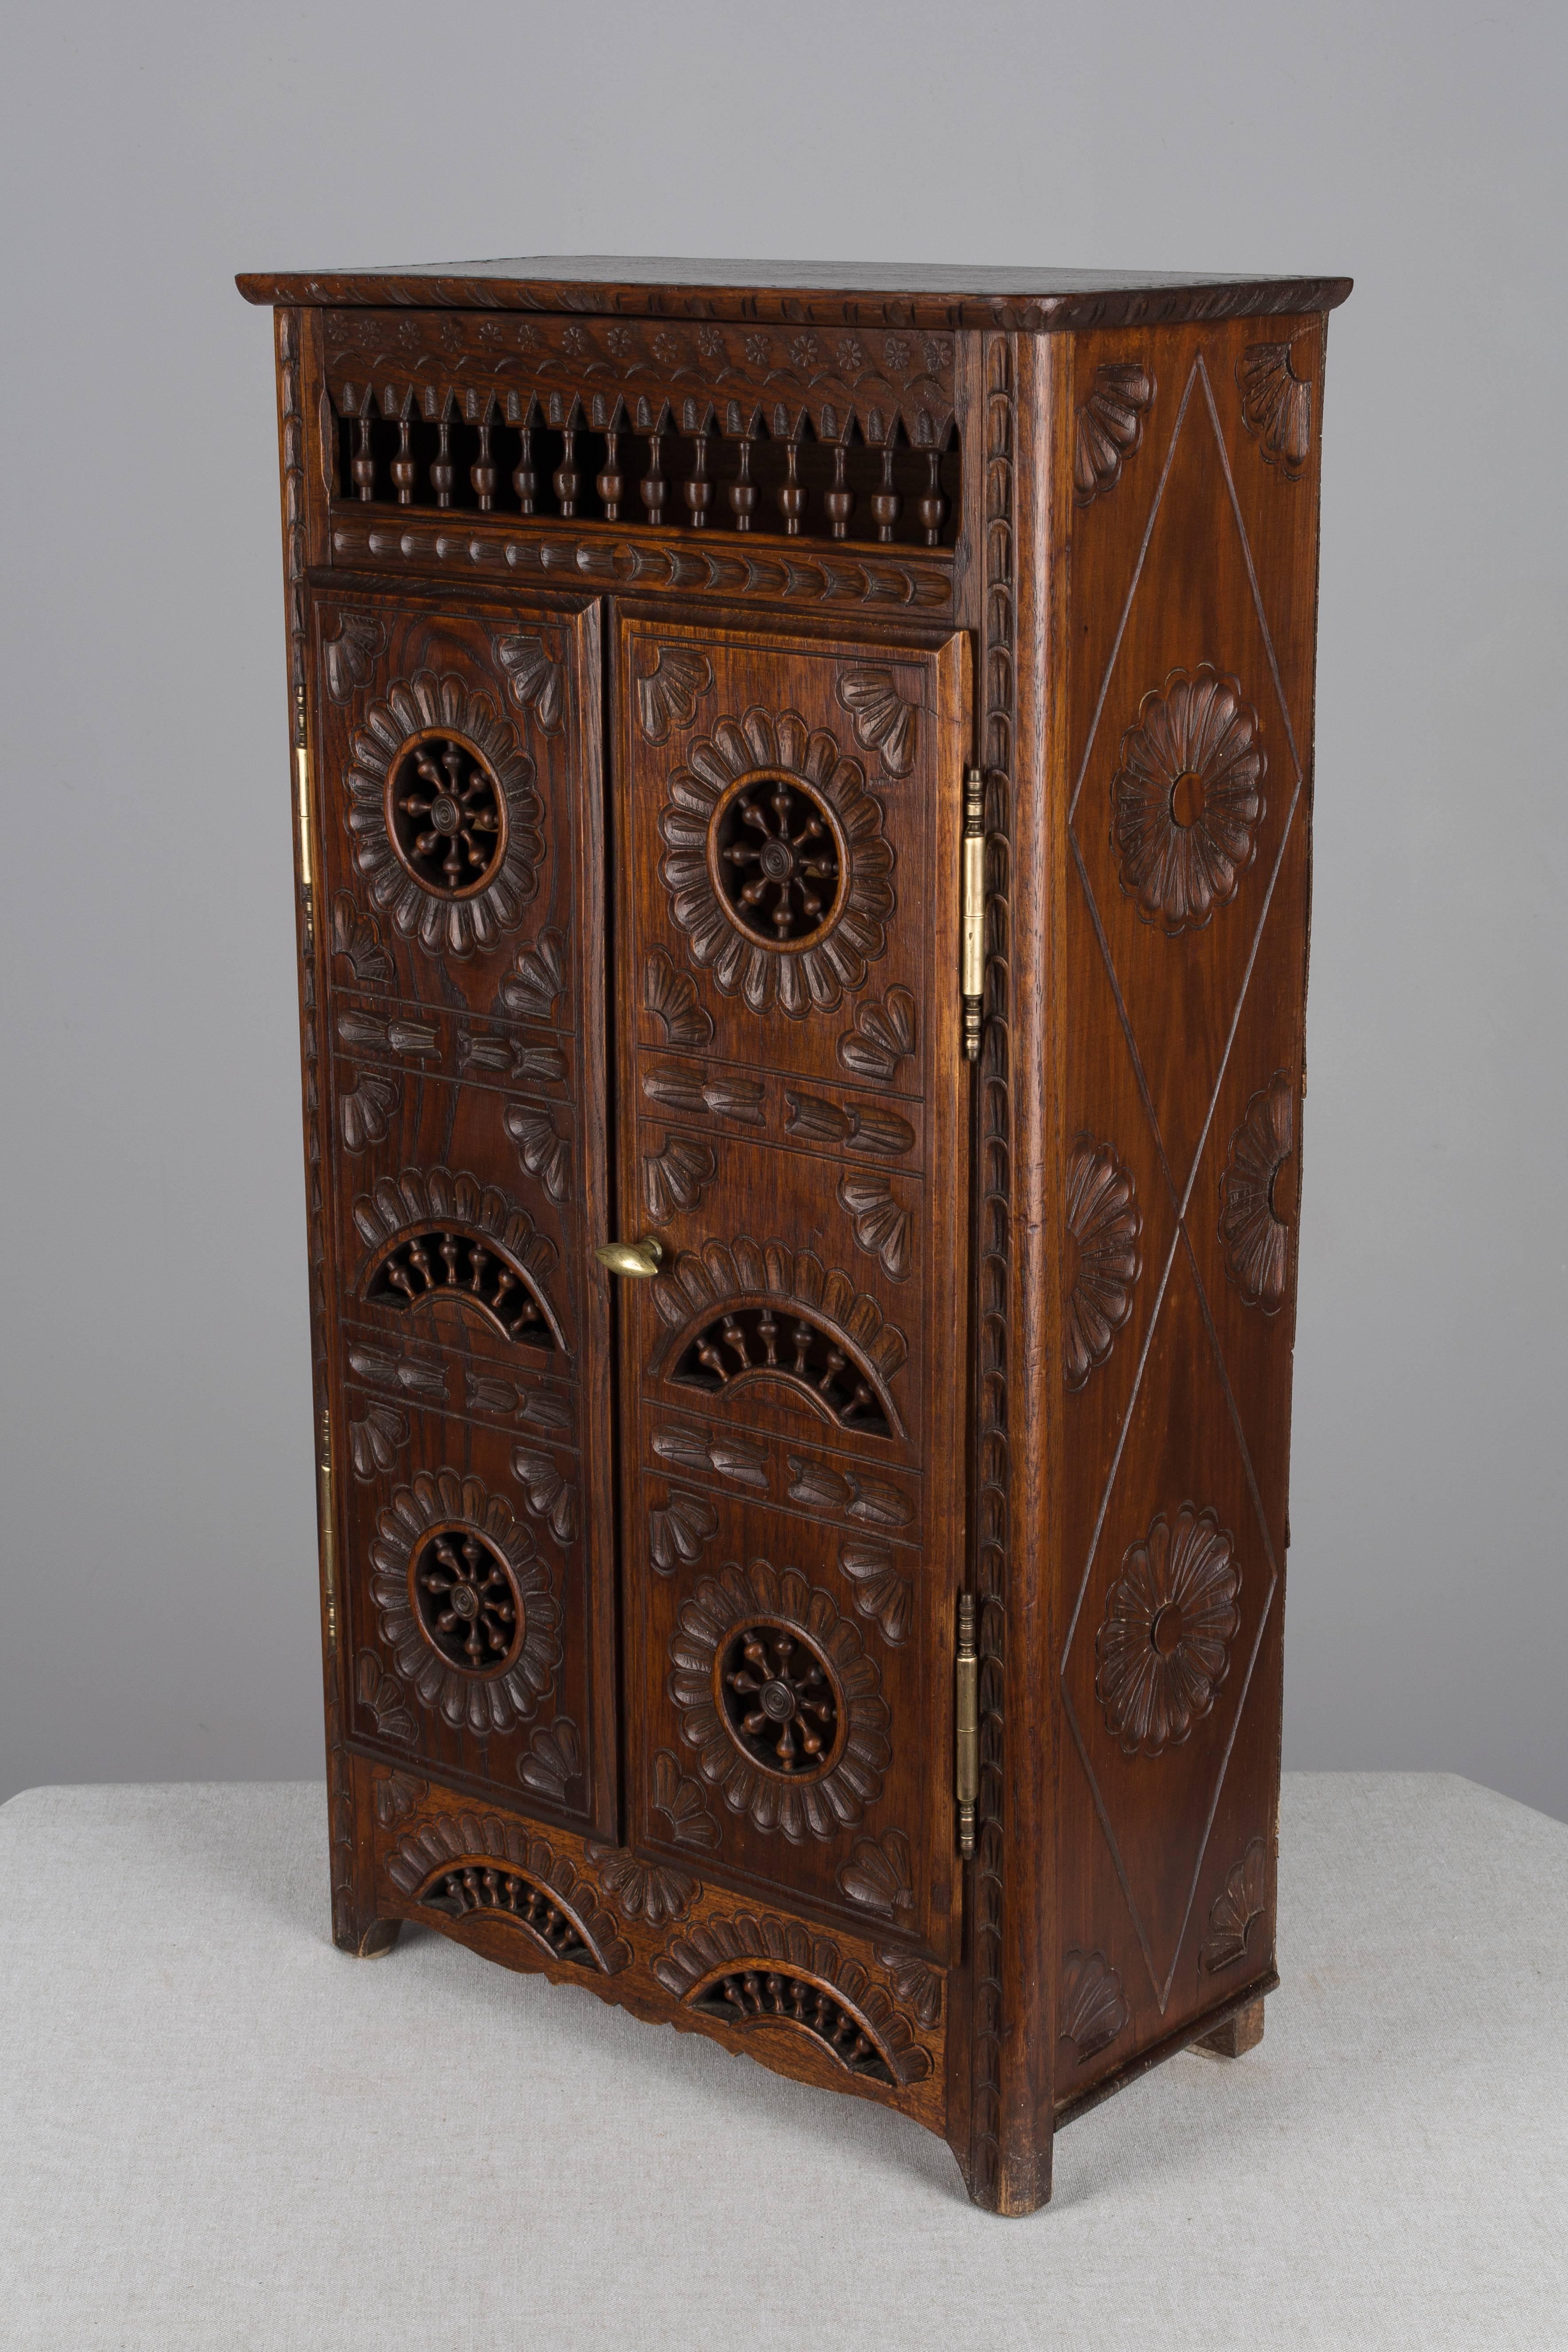 A large-scale French miniature armoire from Brittany, made of dark stained oak and elaborately decorated with hand-carved and incised details. May be used freestanding or as a wall cabinet.  Inside depth is 7